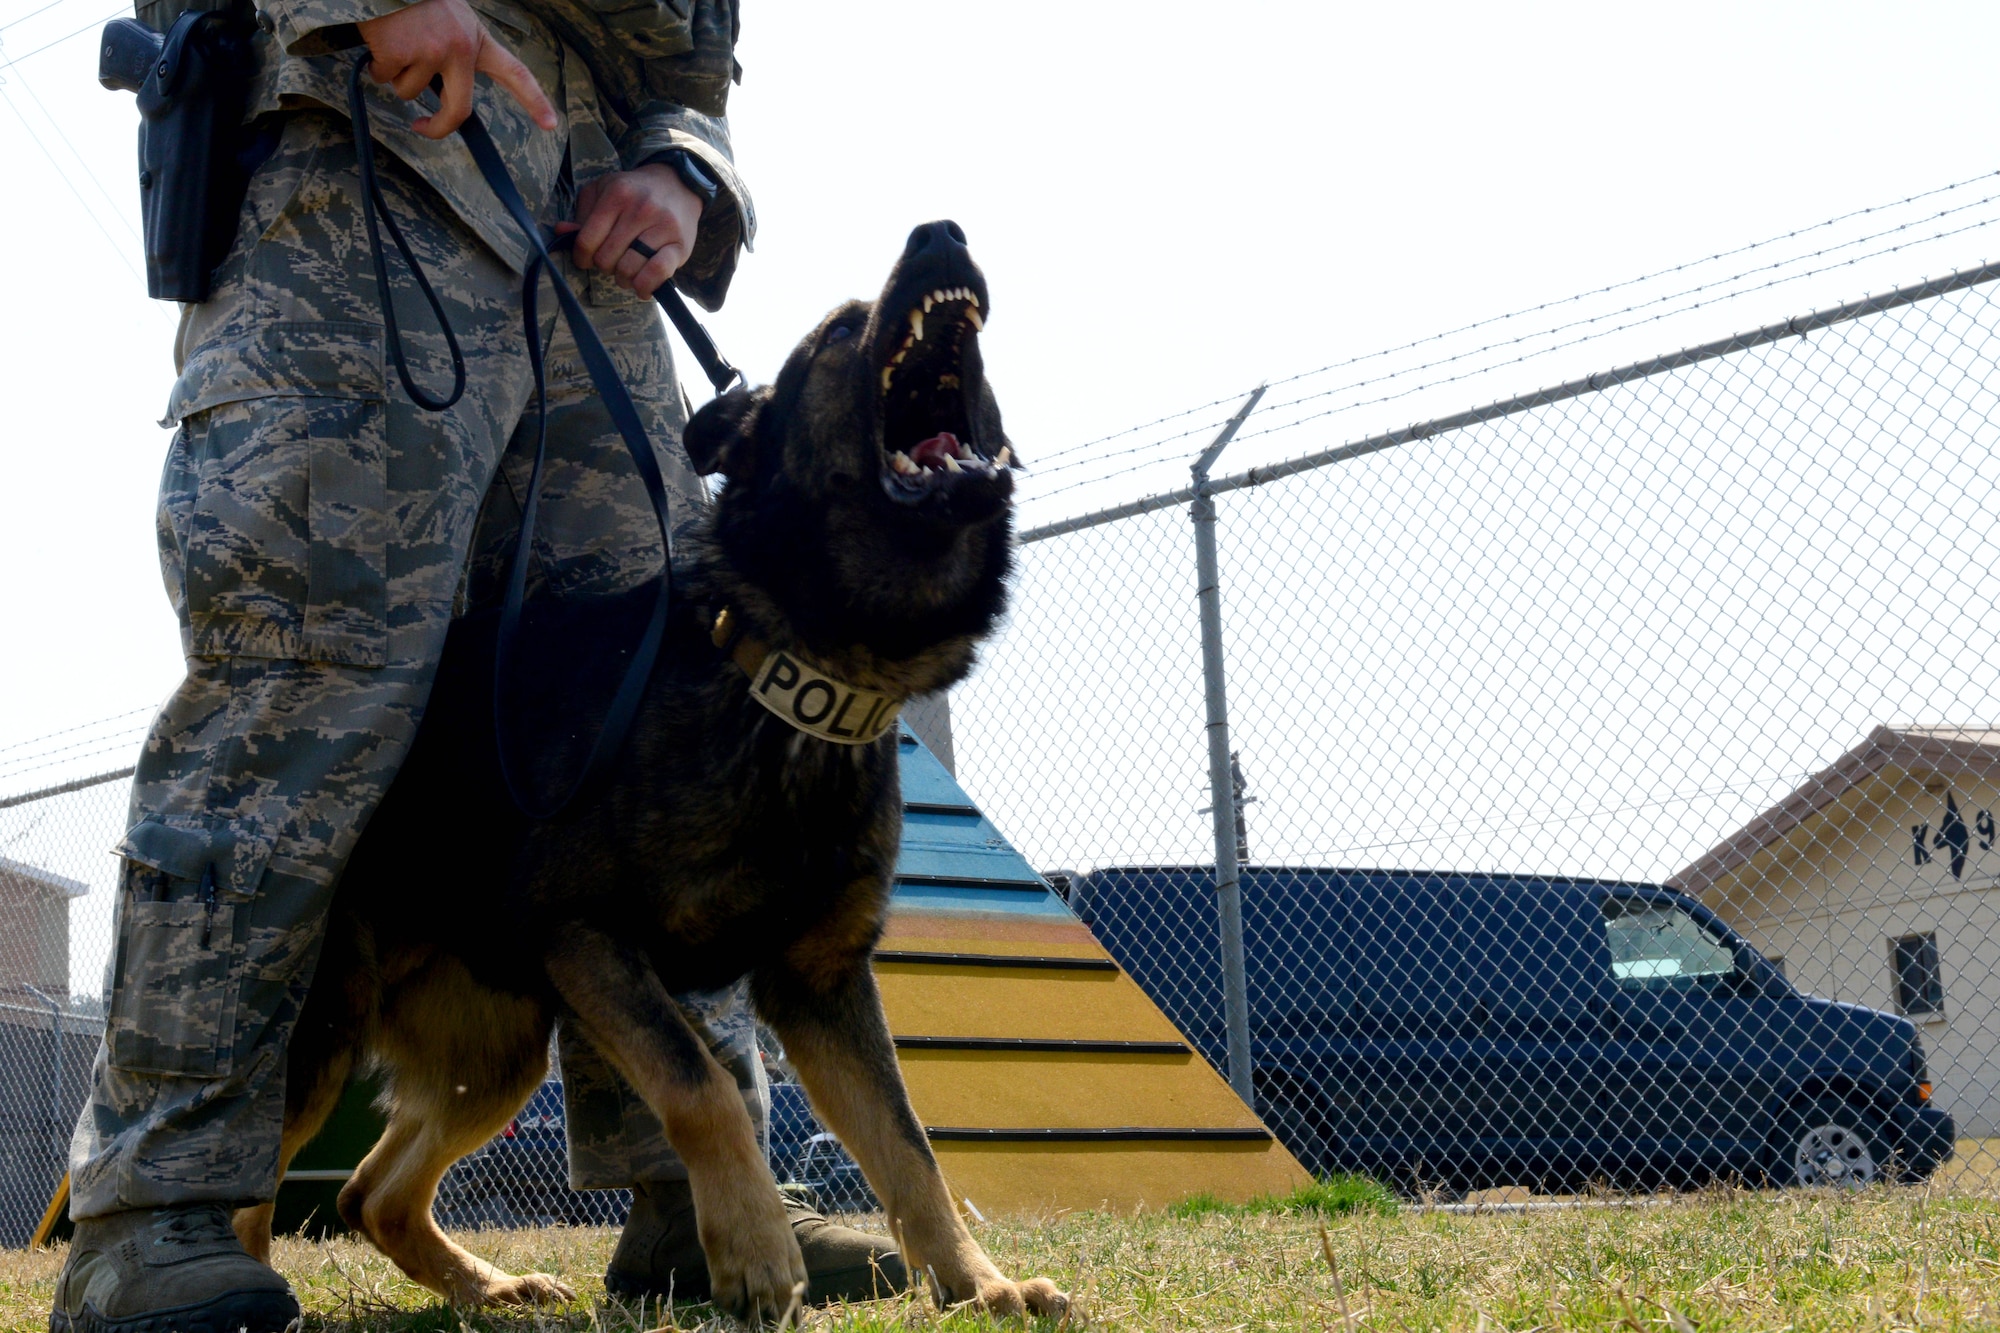 U.S. Air Force Senior Airman Eric Sweat, 8th Security Forces Squadron military working dog handler, keeps ahold of Nex, military working dog at Kunsan Air Base, Republic of Korea, Mar. 25, 2016. Kunsan has a variety of MWD that are trained to attack, find narcotics and find different types of explosives. (U.S. Air Force photo by Senior Airman Ashley L. Gardner/Released)

